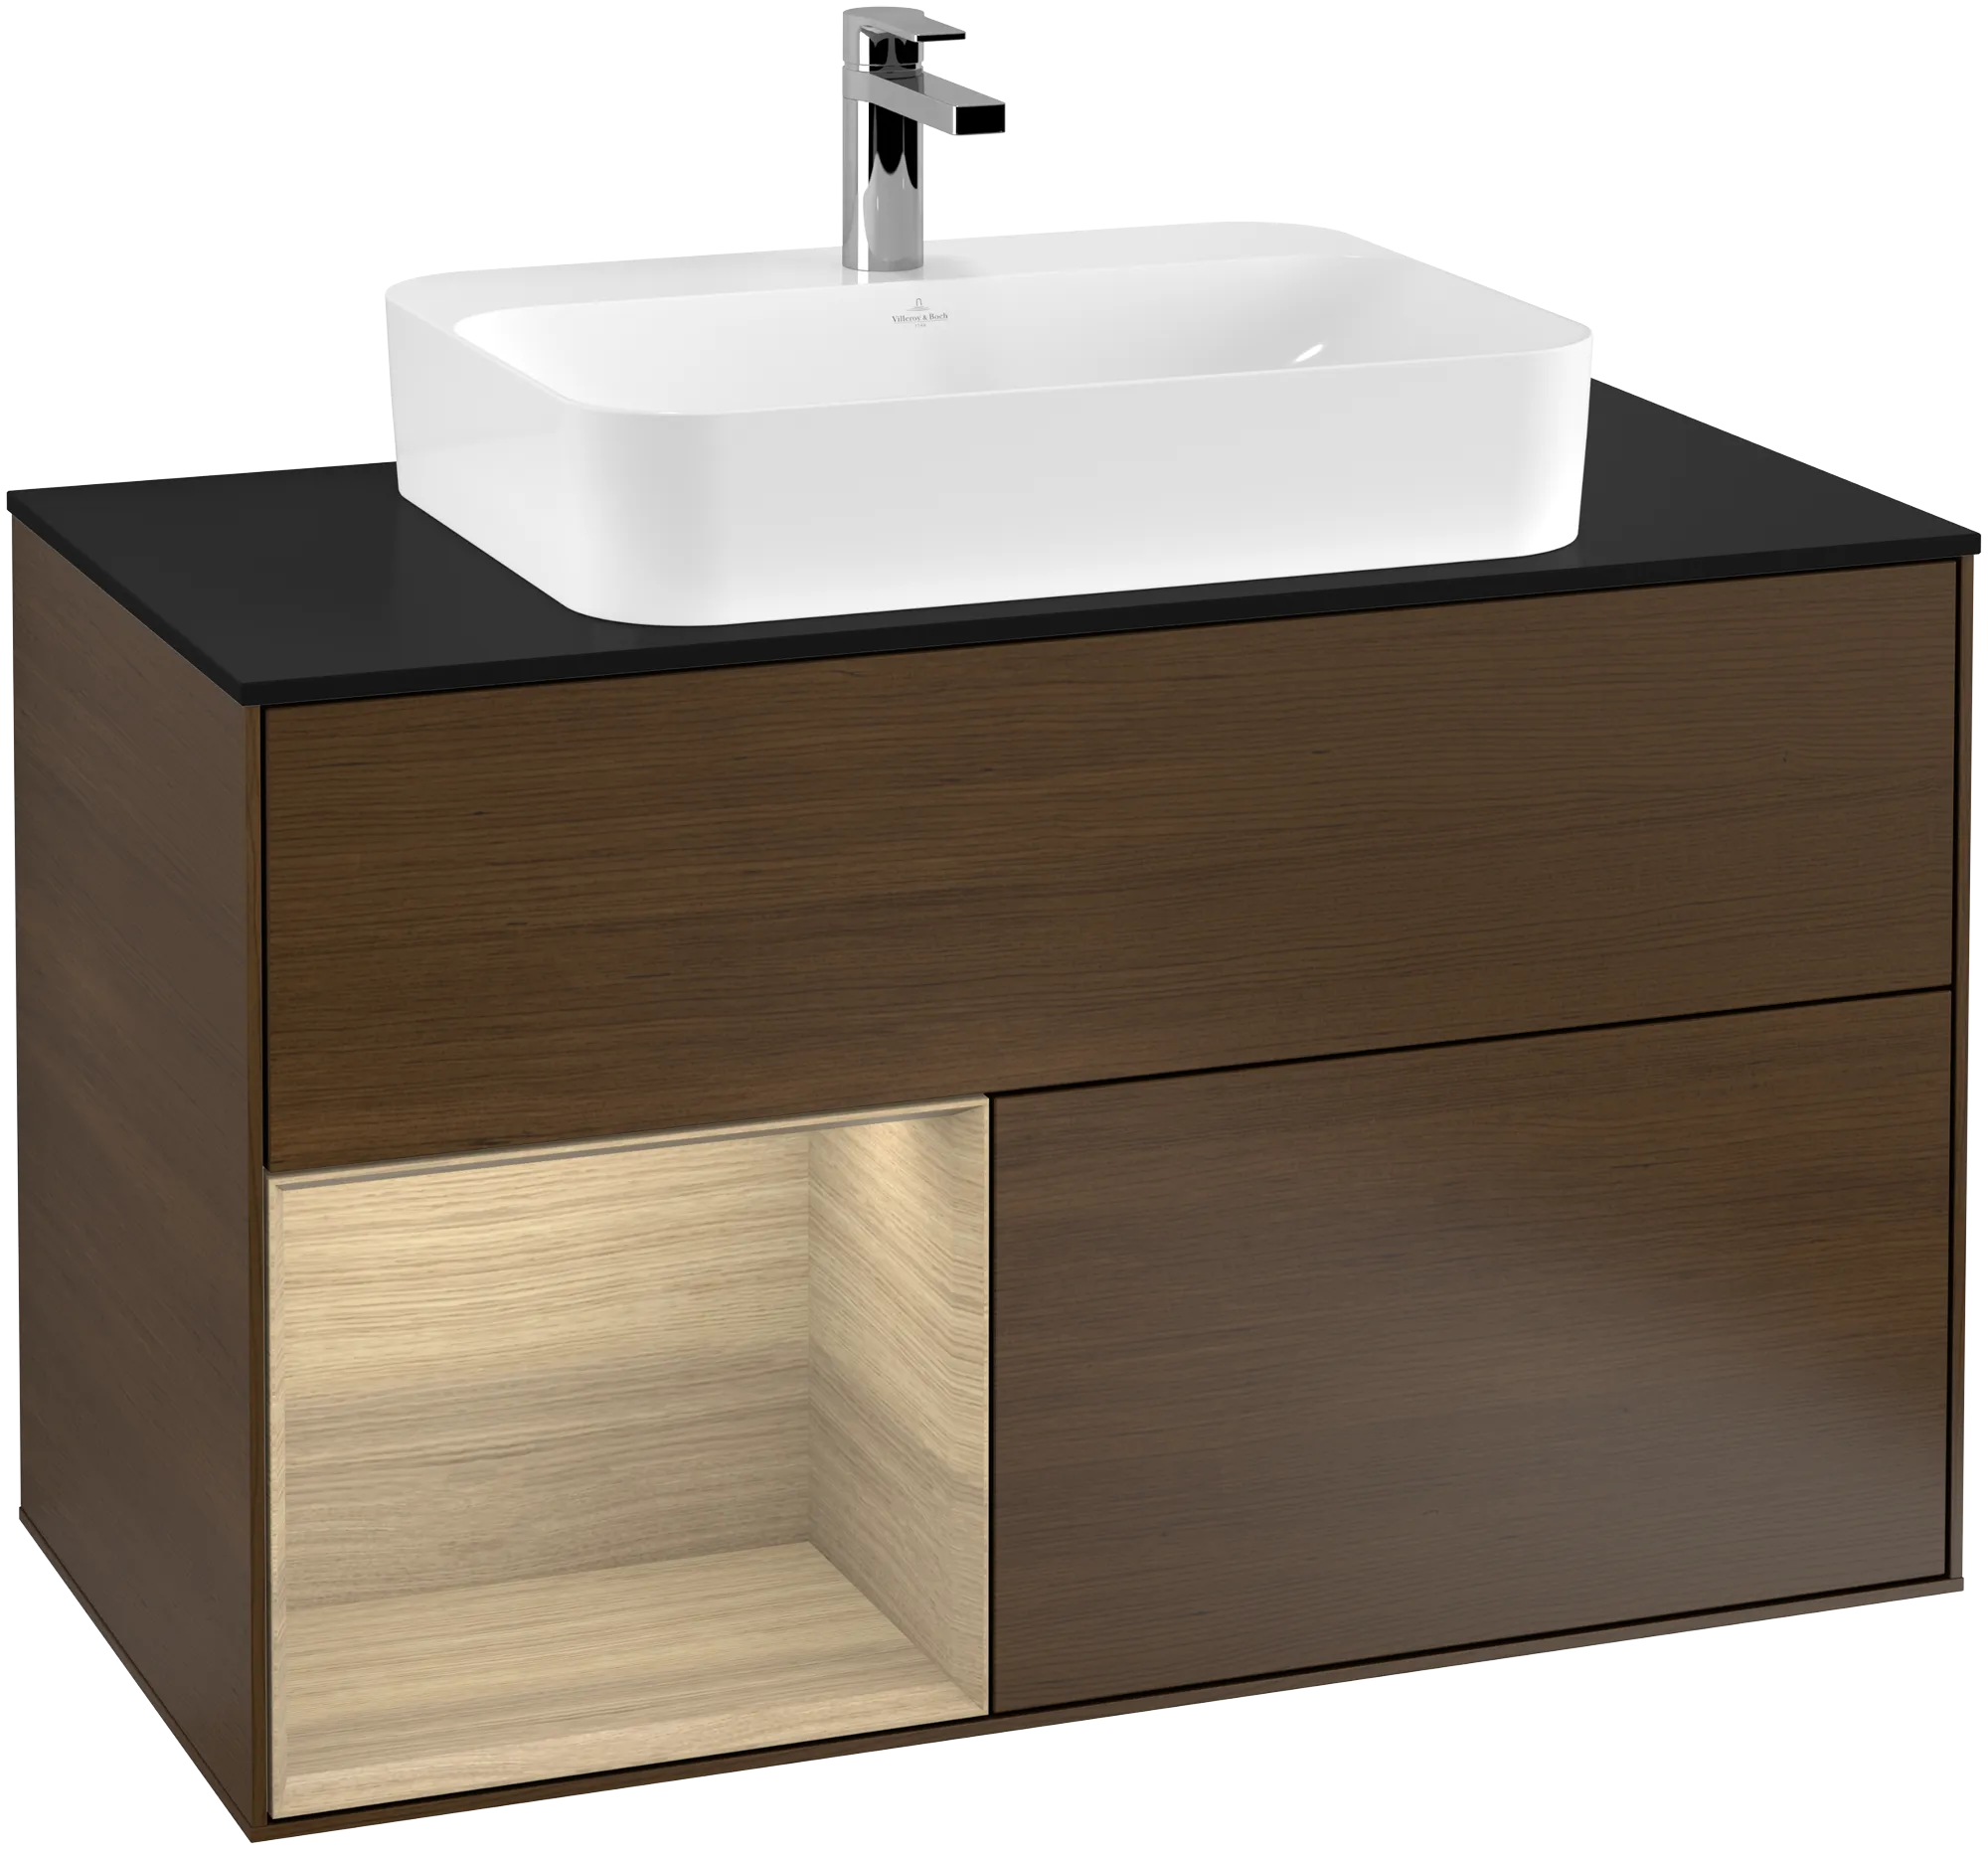 Picture of VILLEROY BOCH Finion Vanity unit, with lighting, 2 pull-out compartments, 1000 x 603 x 501 mm, Walnut Veneer / Oak Veneer / Glass Black Matt #G362PCGN